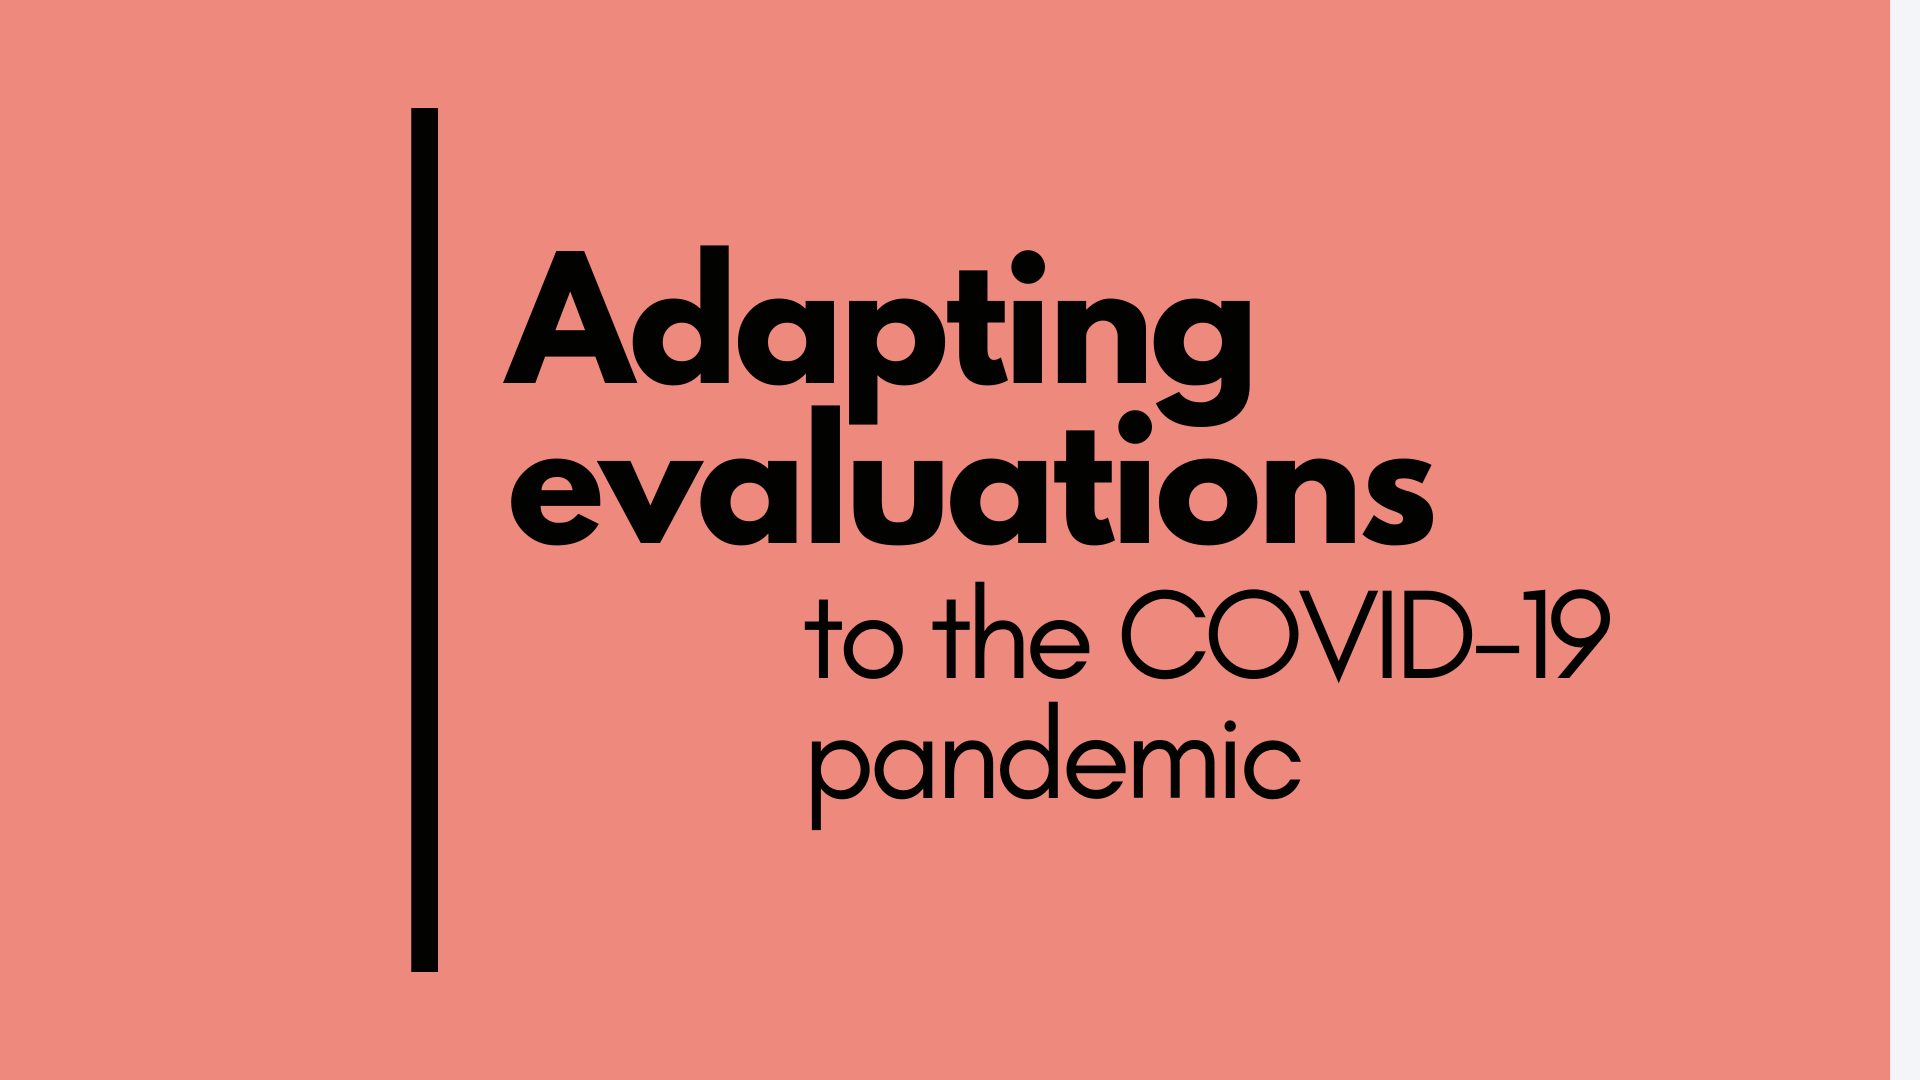 Adapting evaluations to the COVID-19 pandemic